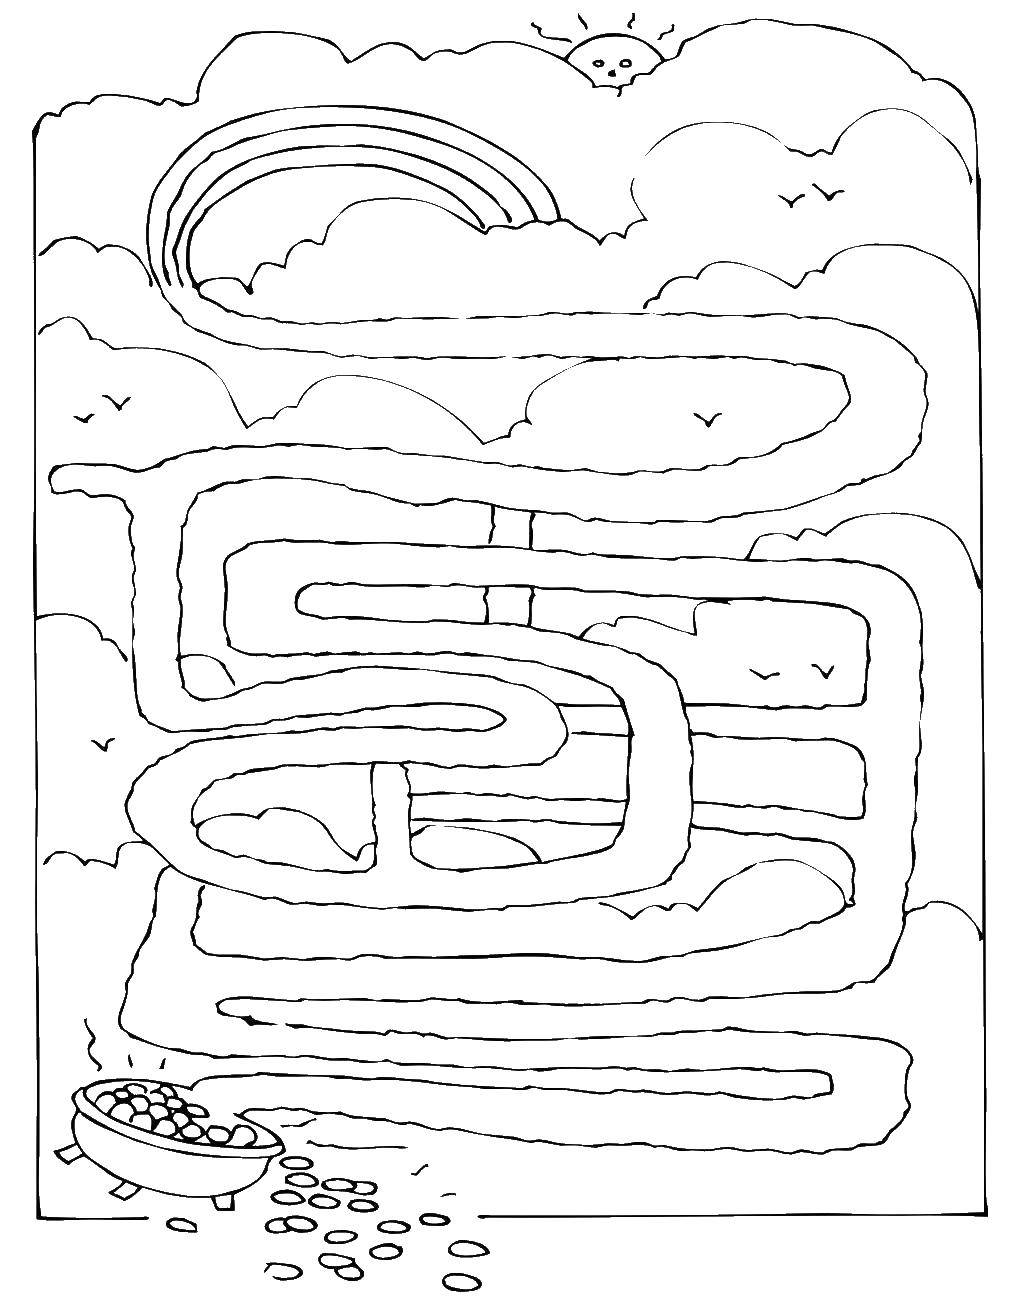 Coloring Find the gold. Category Mazes. Tags:  maze, gold.